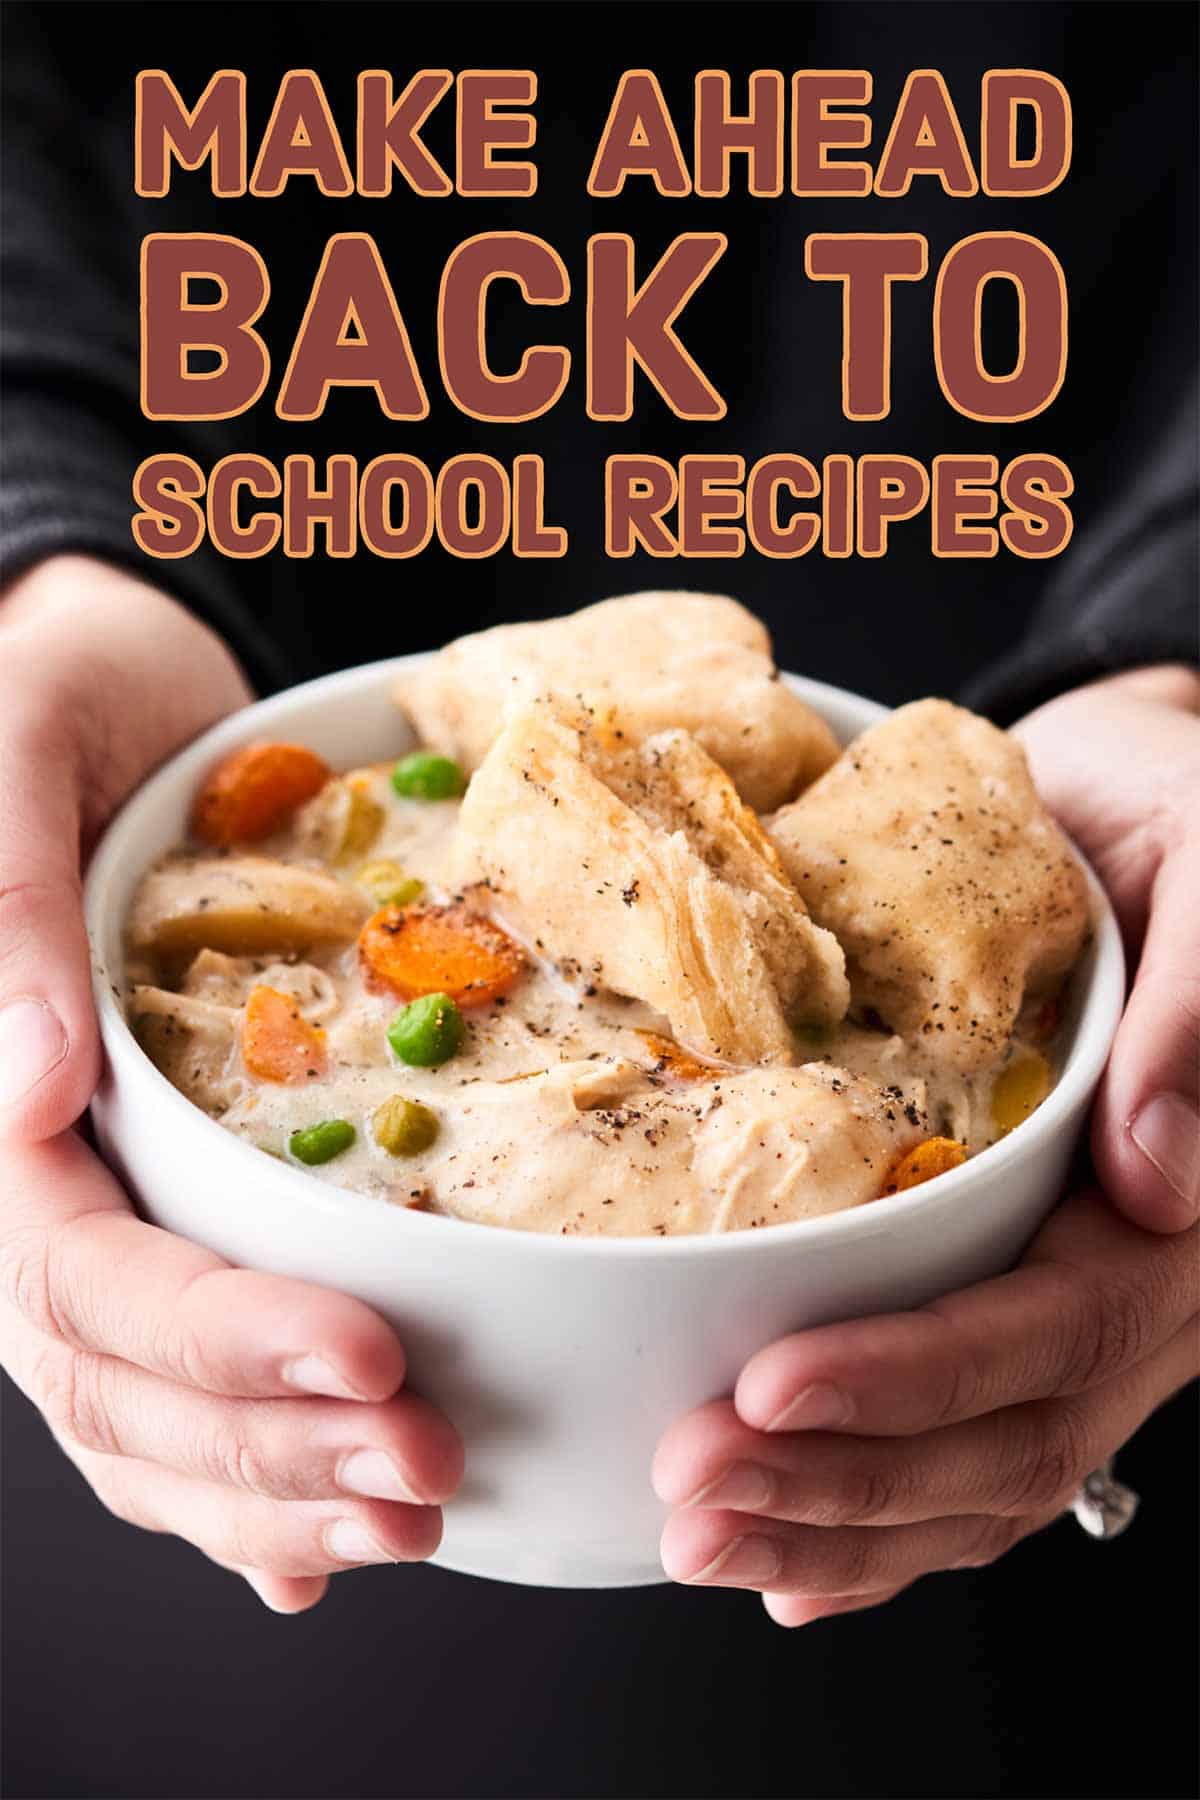 Quick and easy make ahead back to school recipes for breakfasts, lunches, after school snacks, dinners, and desserts! Mostly healthy, all easy and delicious! showmetheyummy.com #backtoschool #recipes